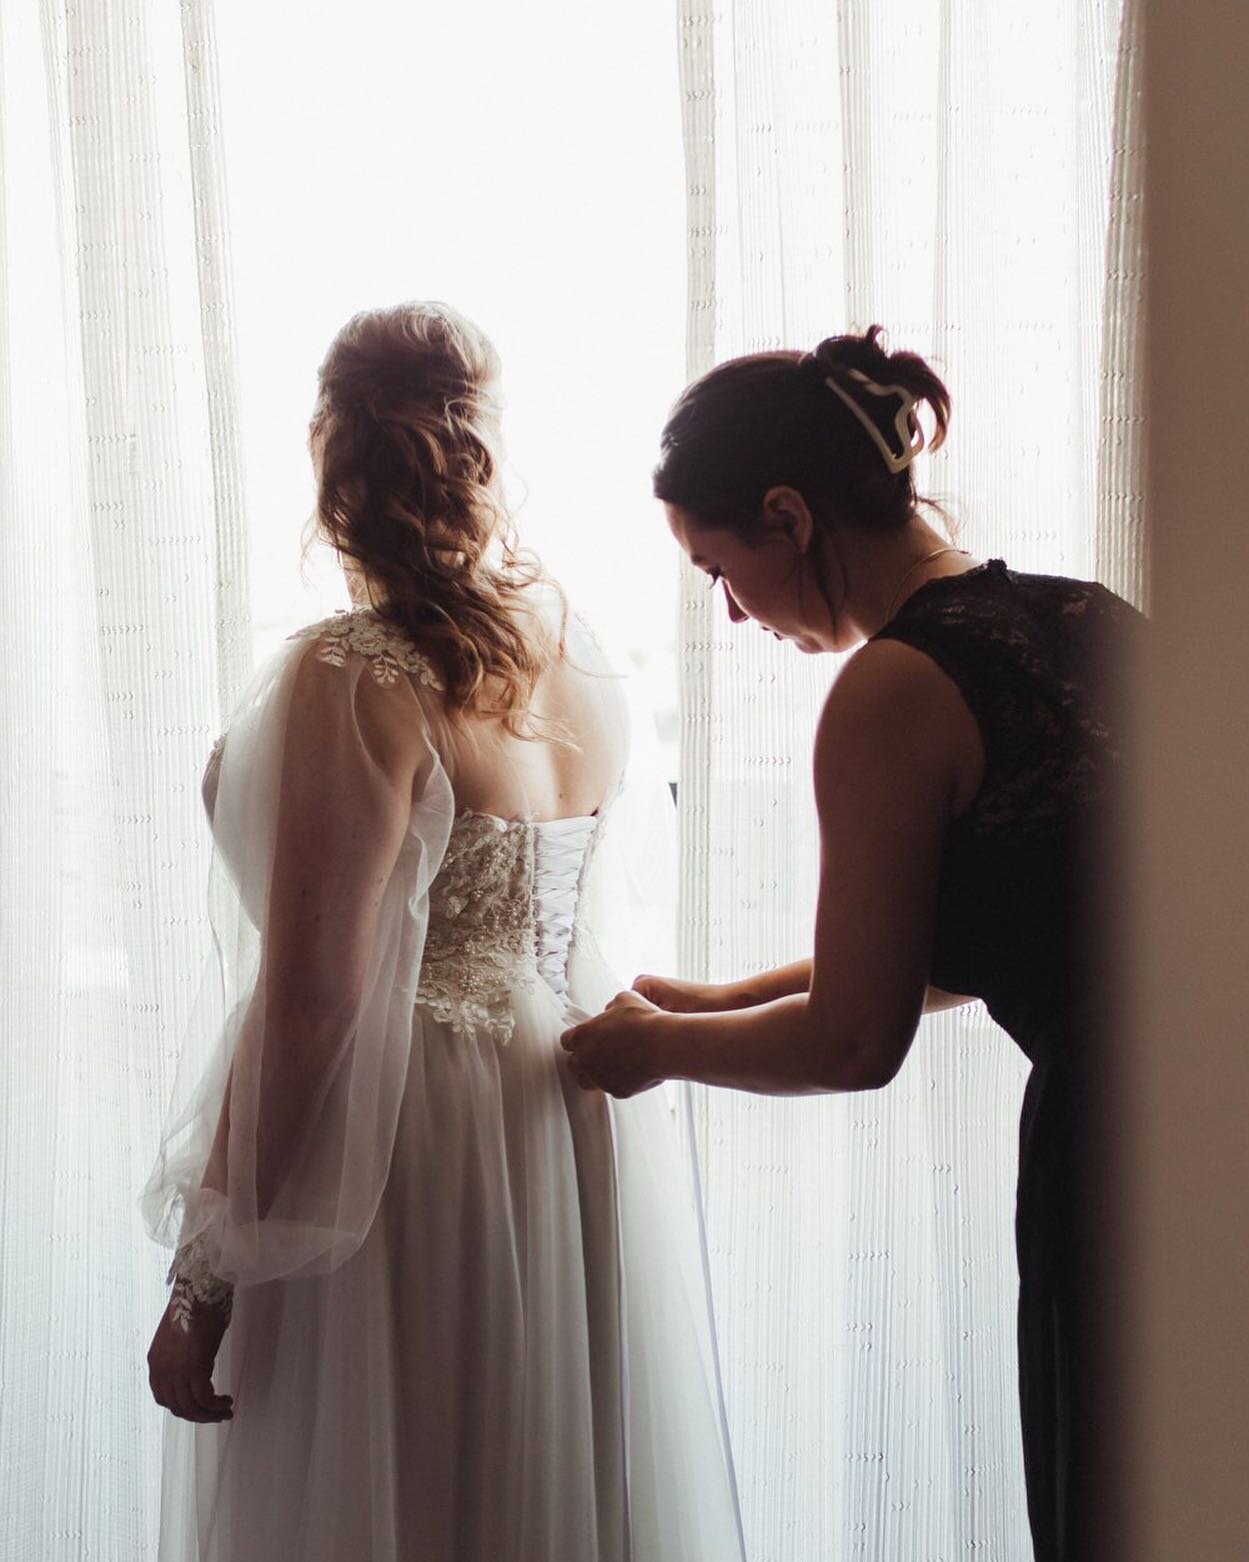 This is such a special photo. Let me tell you why- the maid of honor is helping the bride into her dress that was MADE by the MOH herself. SHE. MADE. IT. It was so special to be a part of this day. Would you trust your MOH to hand-make your wedding d